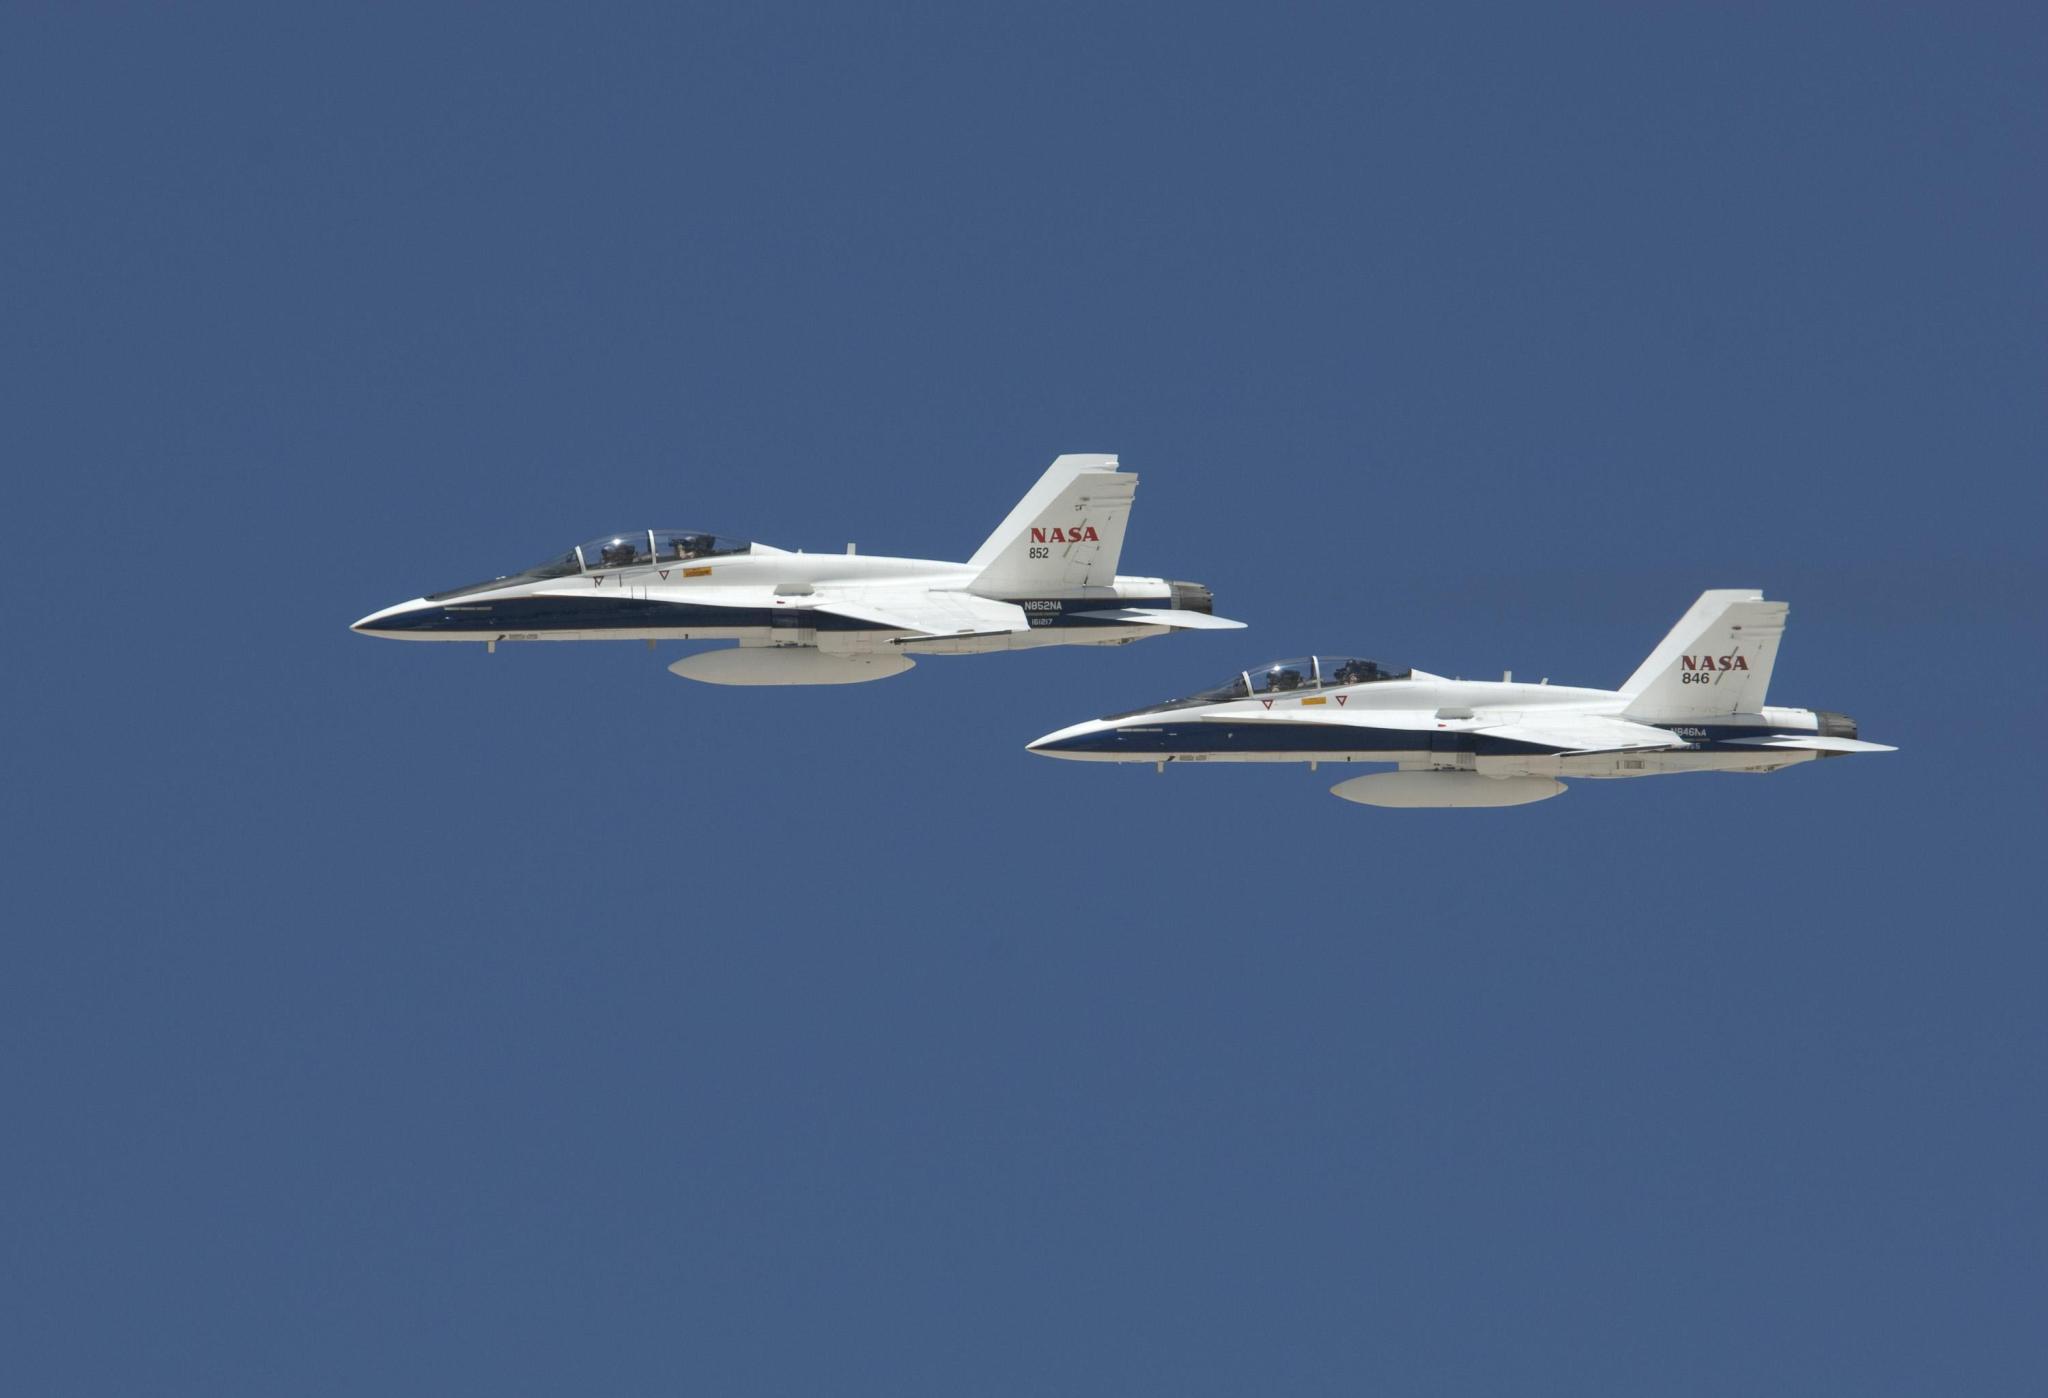 Two F/A-18B aircraft in flight in formation against blue skies.